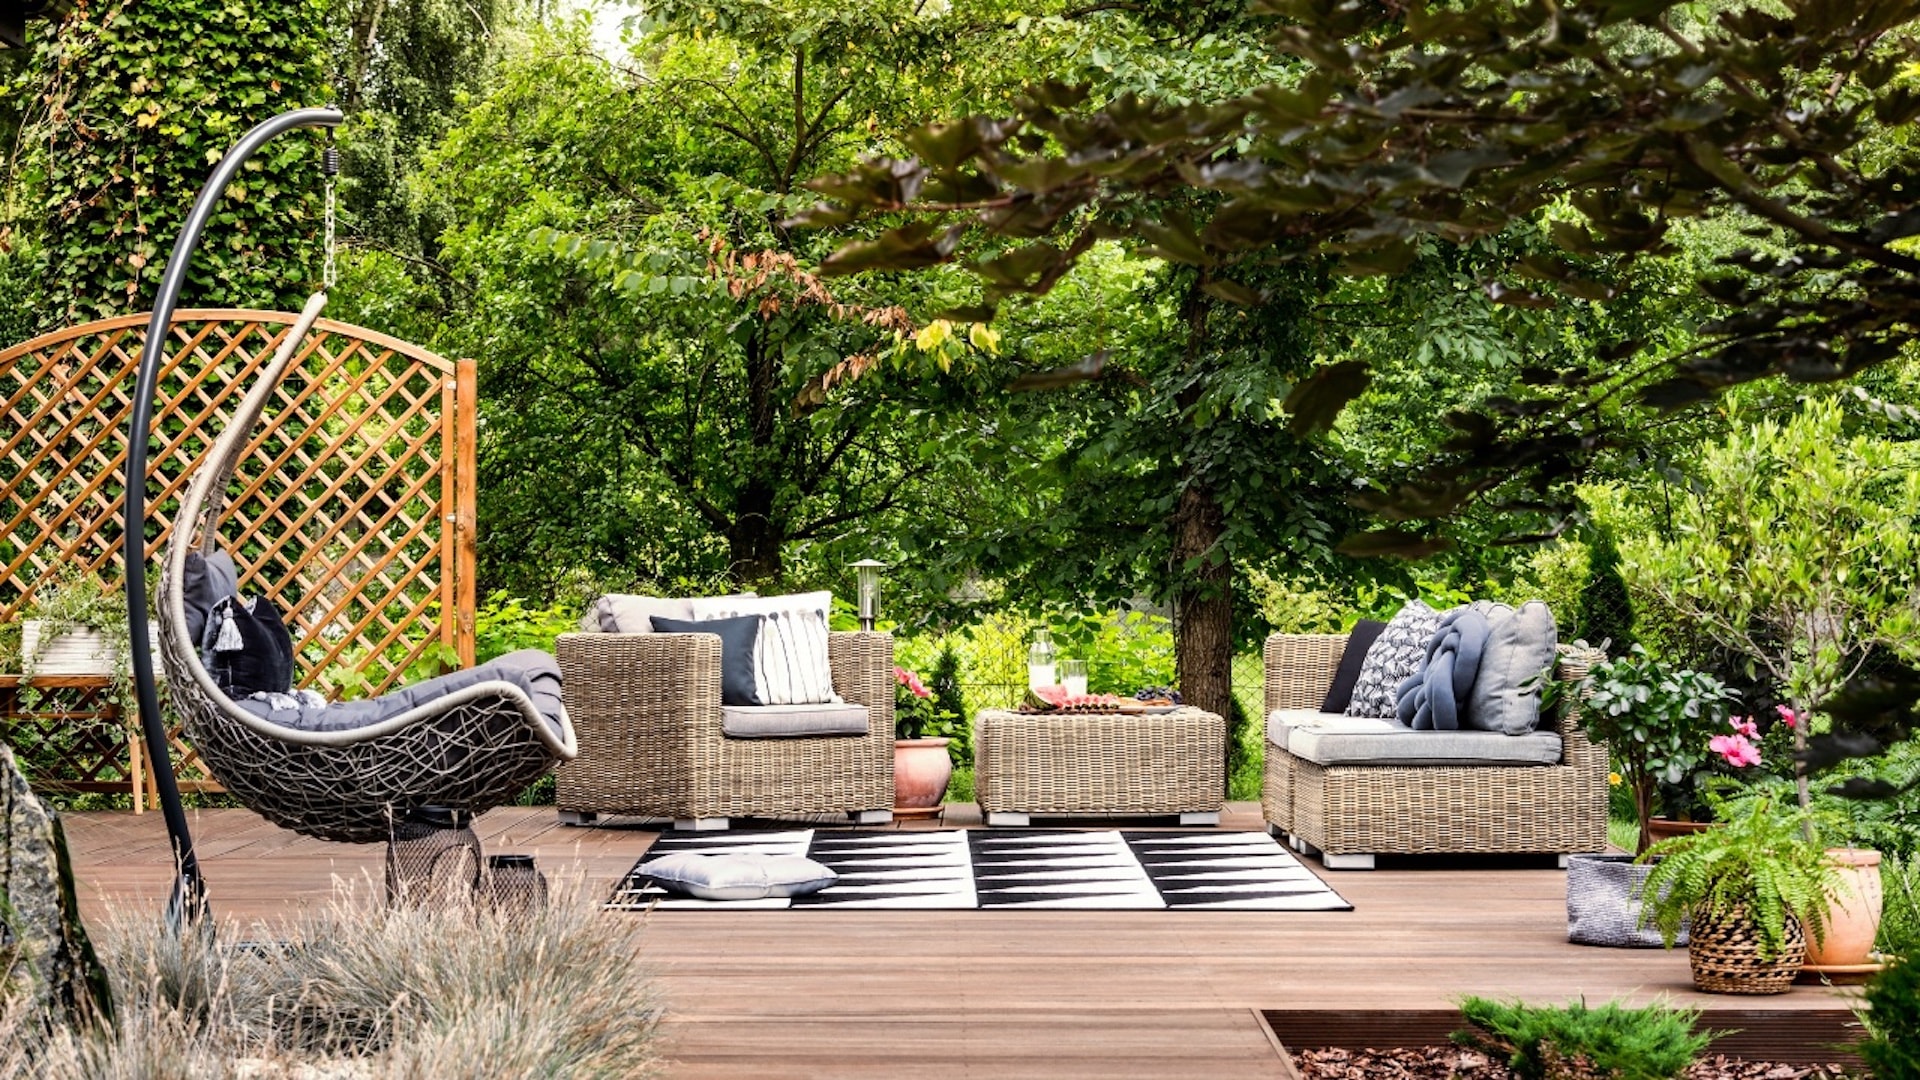 Transform Your Home Outdoor Space: 10 Inspiring Ideas for a Stunning Backyard Oasis